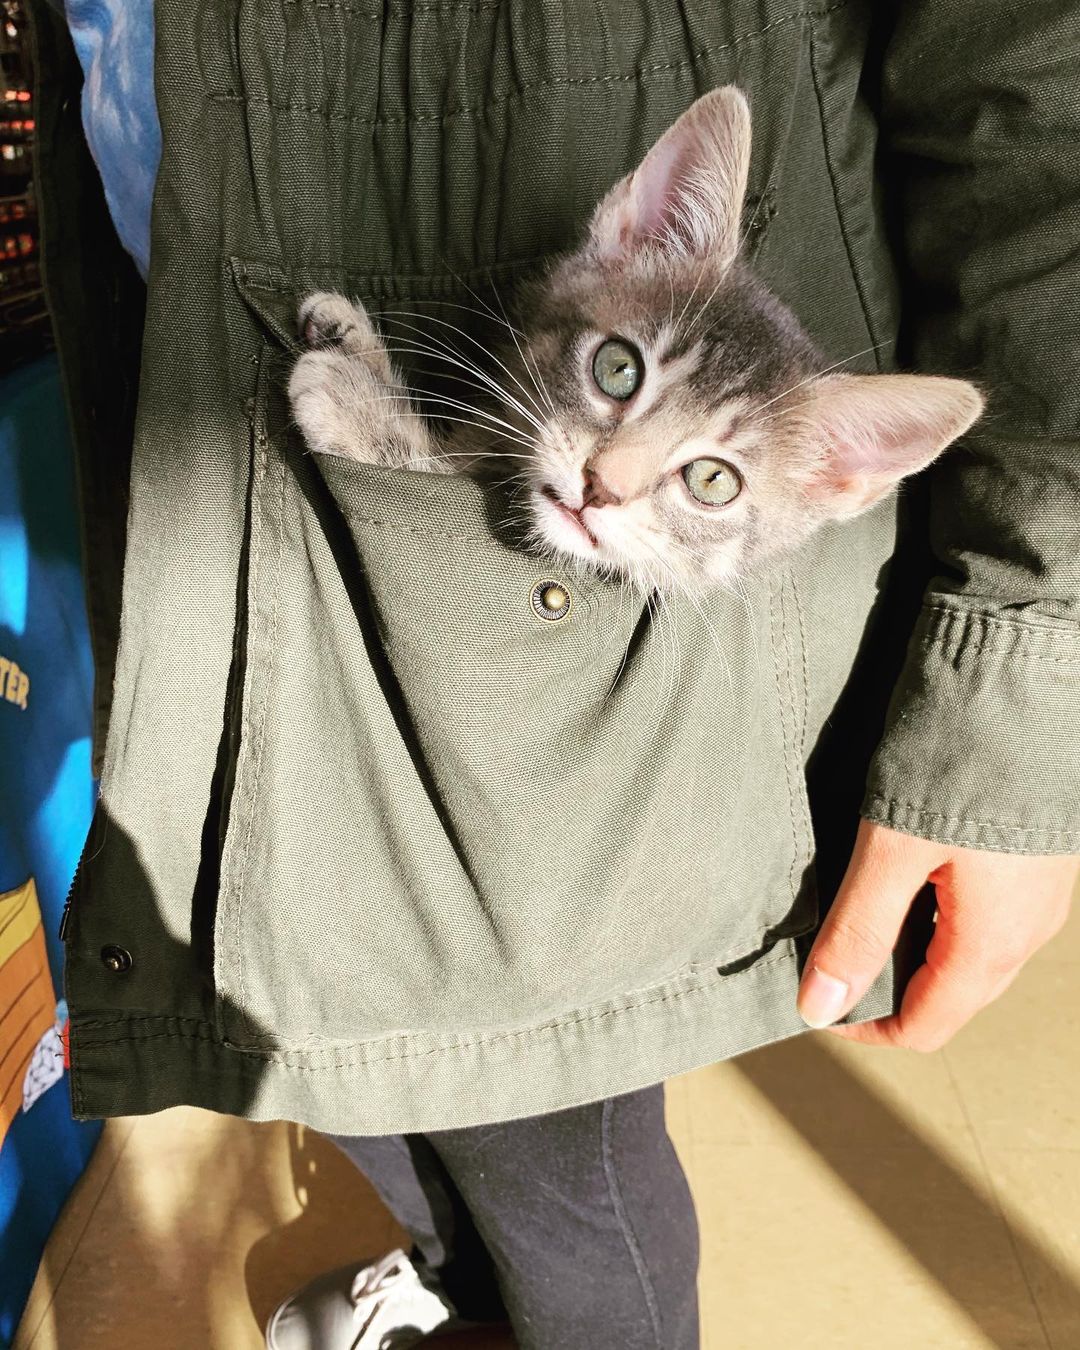 You know how women always want bigger pockets??? THIS IS WHY. <a target='_blank' href='https://www.instagram.com/explore/tags/adoptdontshop/'>#adoptdontshop</a> <a target='_blank' href='https://www.instagram.com/explore/tags/kitten/'>#kitten</a> <a target='_blank' href='https://www.instagram.com/explore/tags/rescue/'>#rescue</a> <a target='_blank' href='https://www.instagram.com/explore/tags/hiddentreasures/'>#hiddentreasures</a> <a target='_blank' href='https://www.instagram.com/explore/tags/hiddentreasuresadoptioncenter/'>#hiddentreasuresadoptioncenter</a>